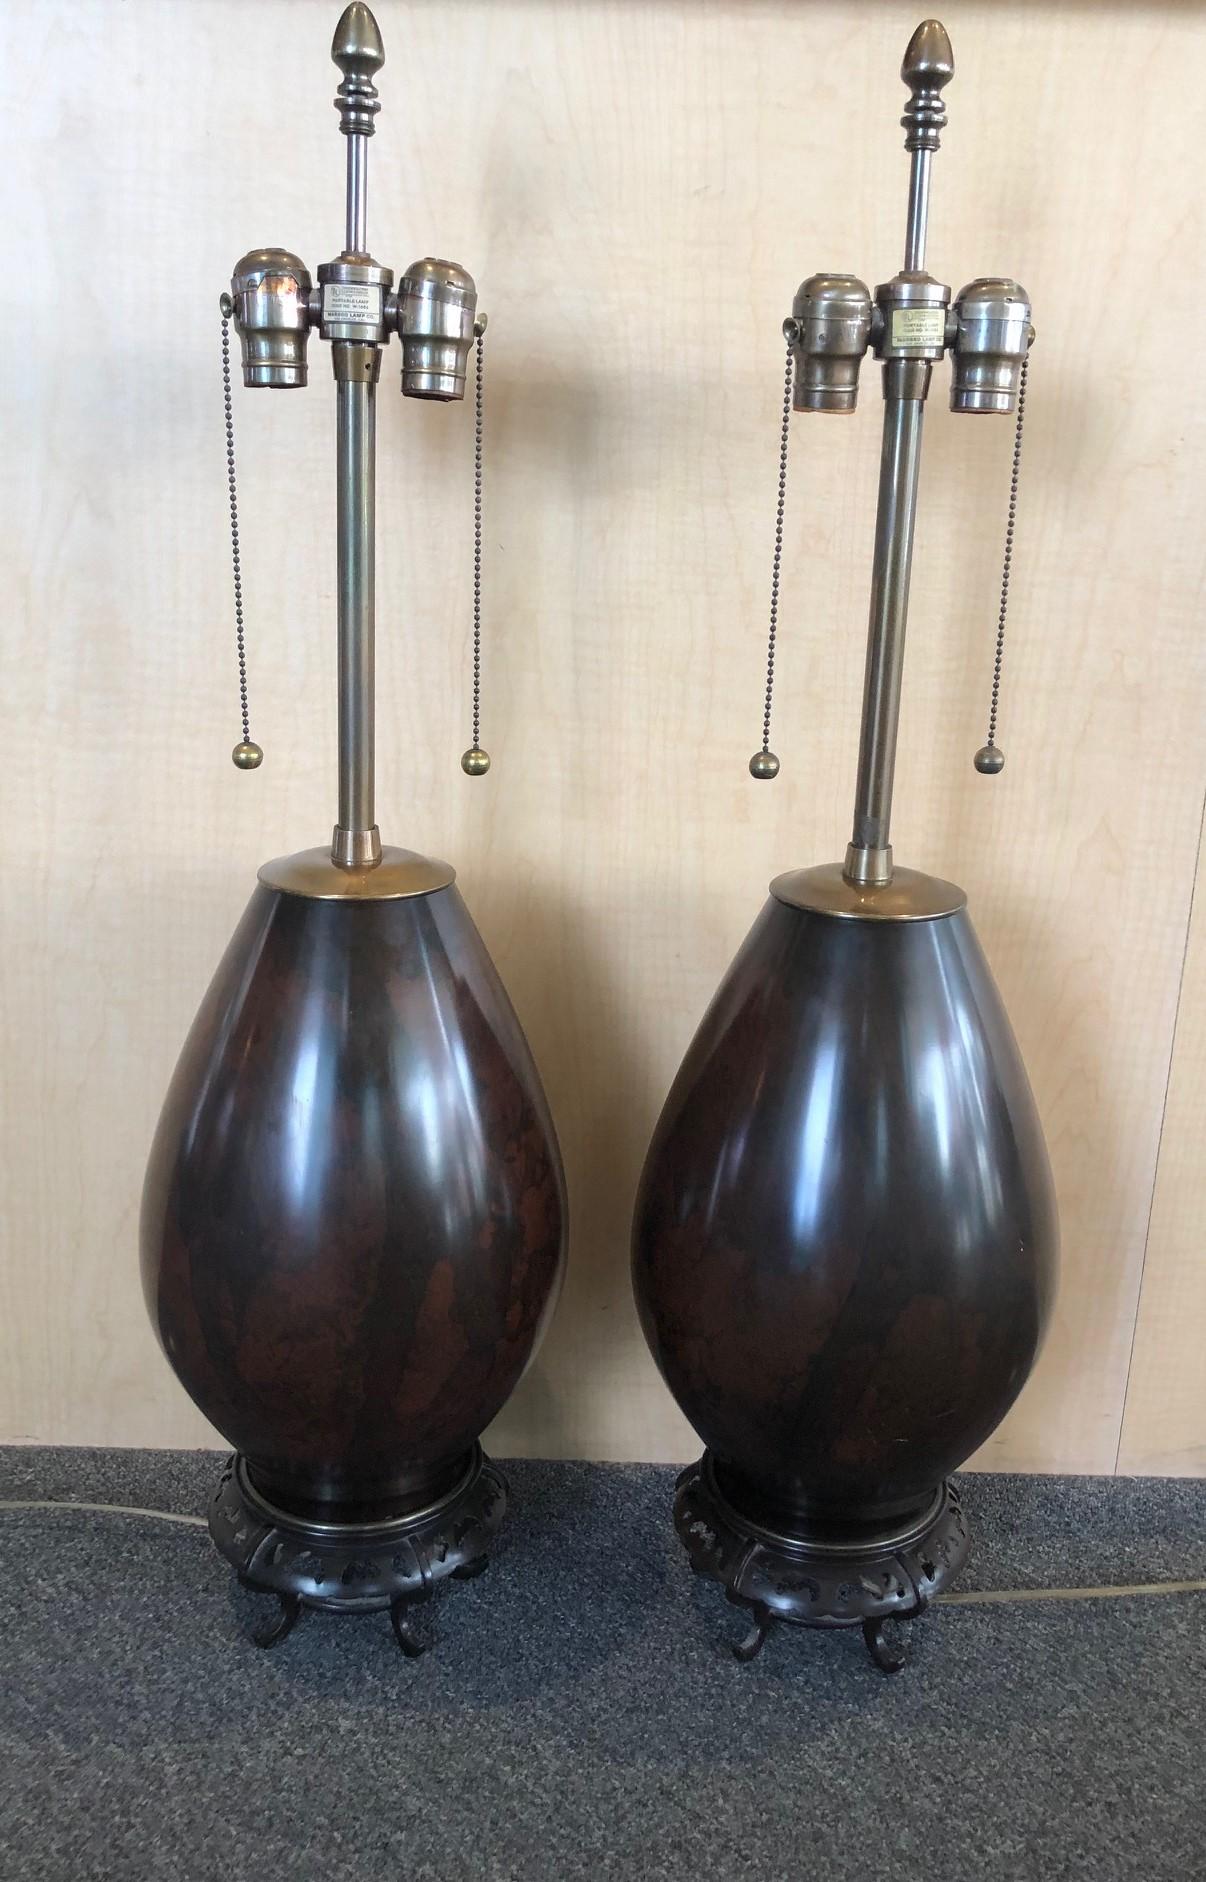 20th Century Pair of Japanese Mixed Metal Table Lamps by Marbro Lamp Company